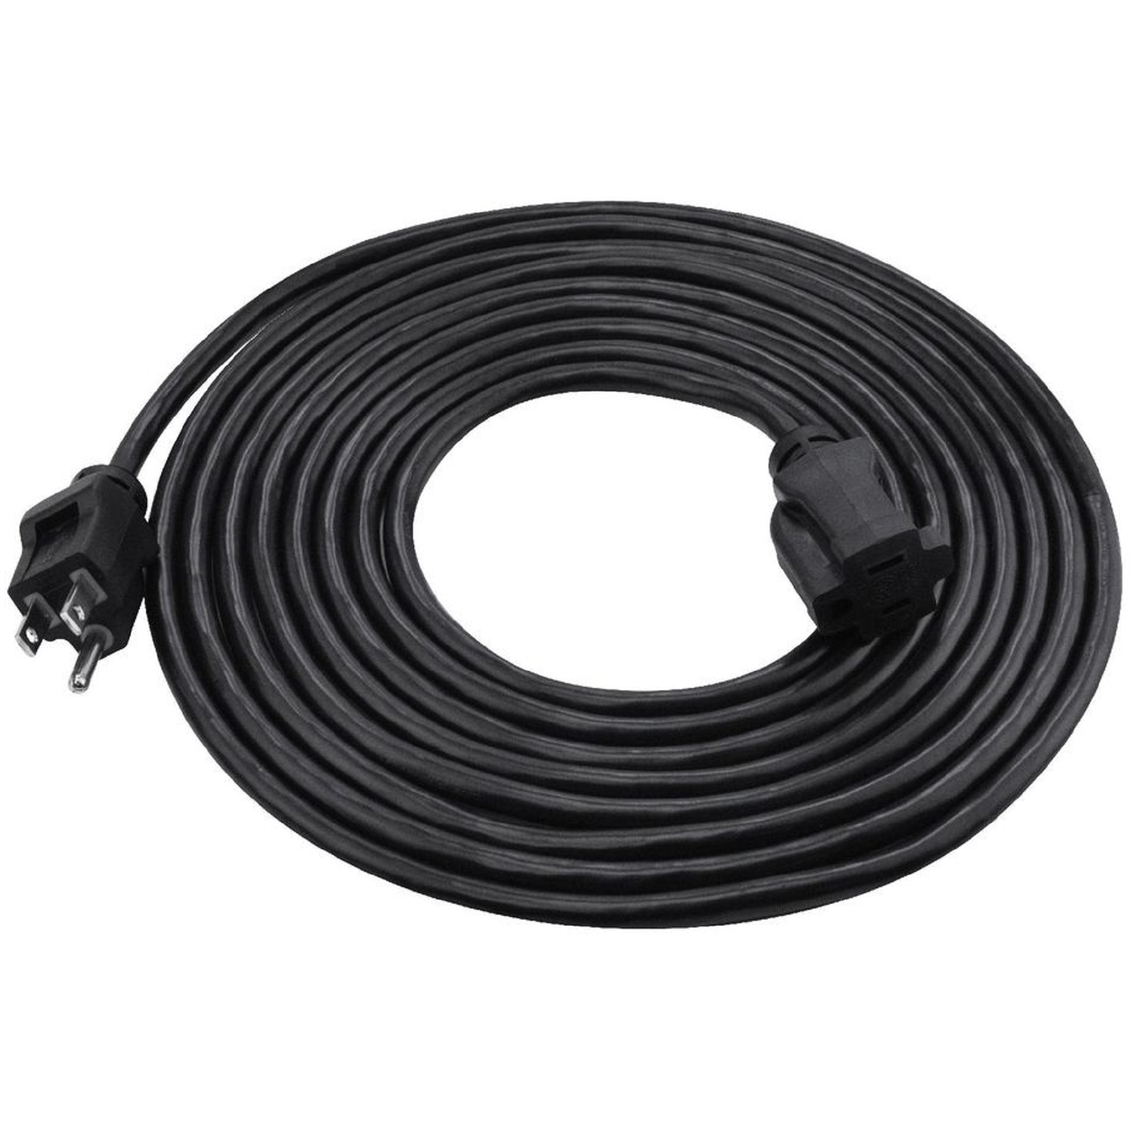 Prime Wire & Cable 15 ft. 16/3 SJTW Workshop Extension Cord - Image 2 of 2